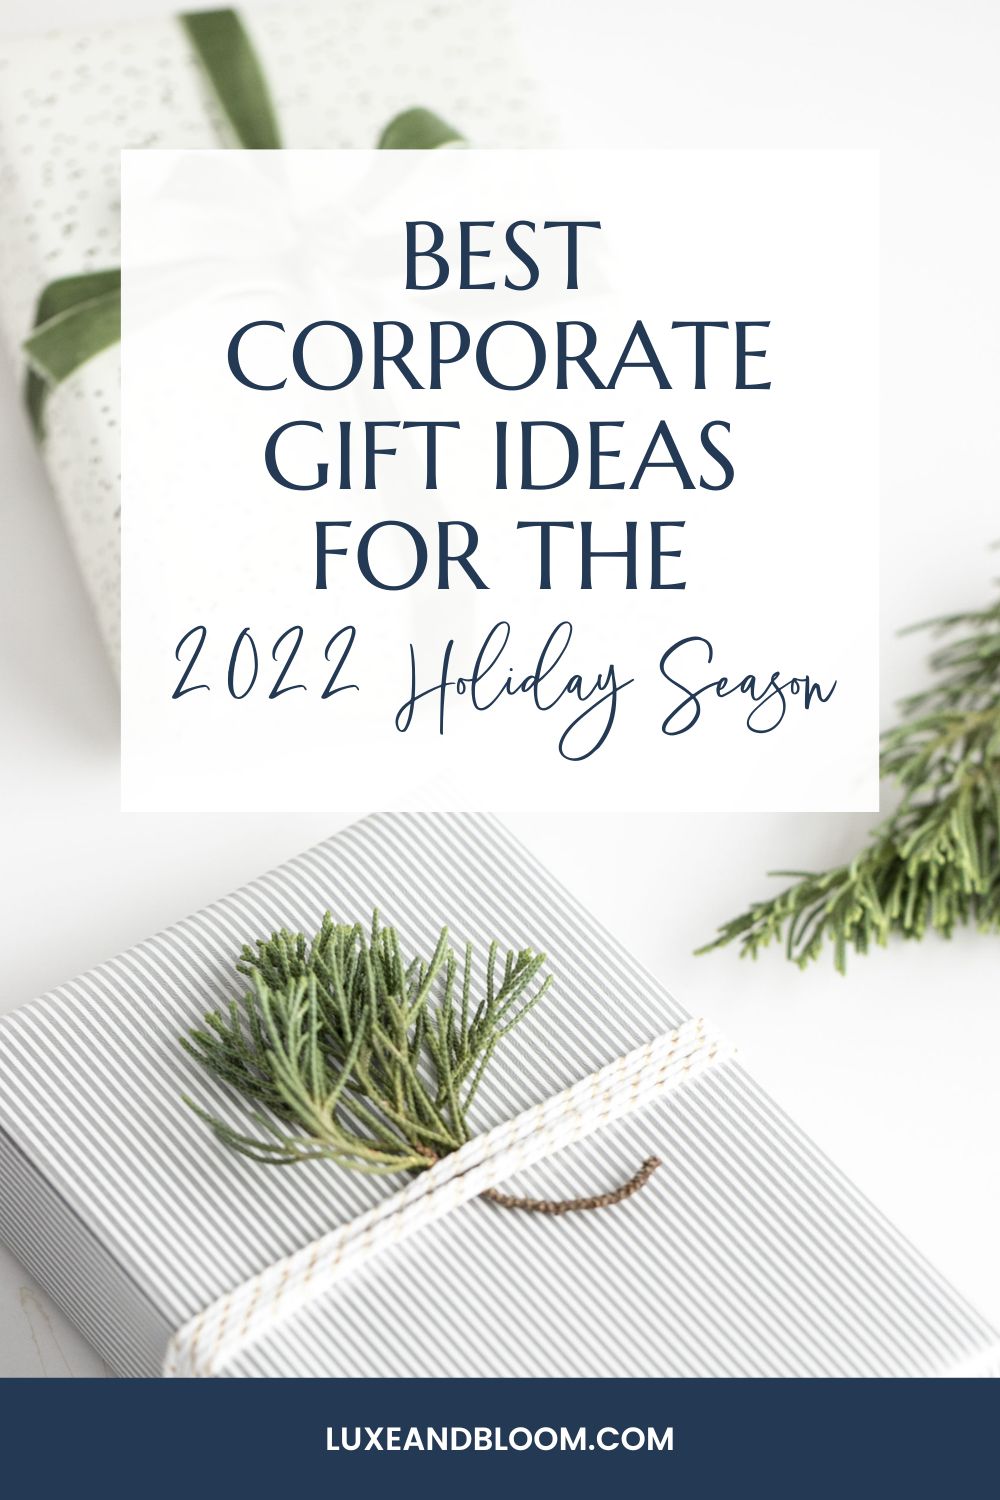 Best Corporate Gift Ideas For The 2022 Holiday Season